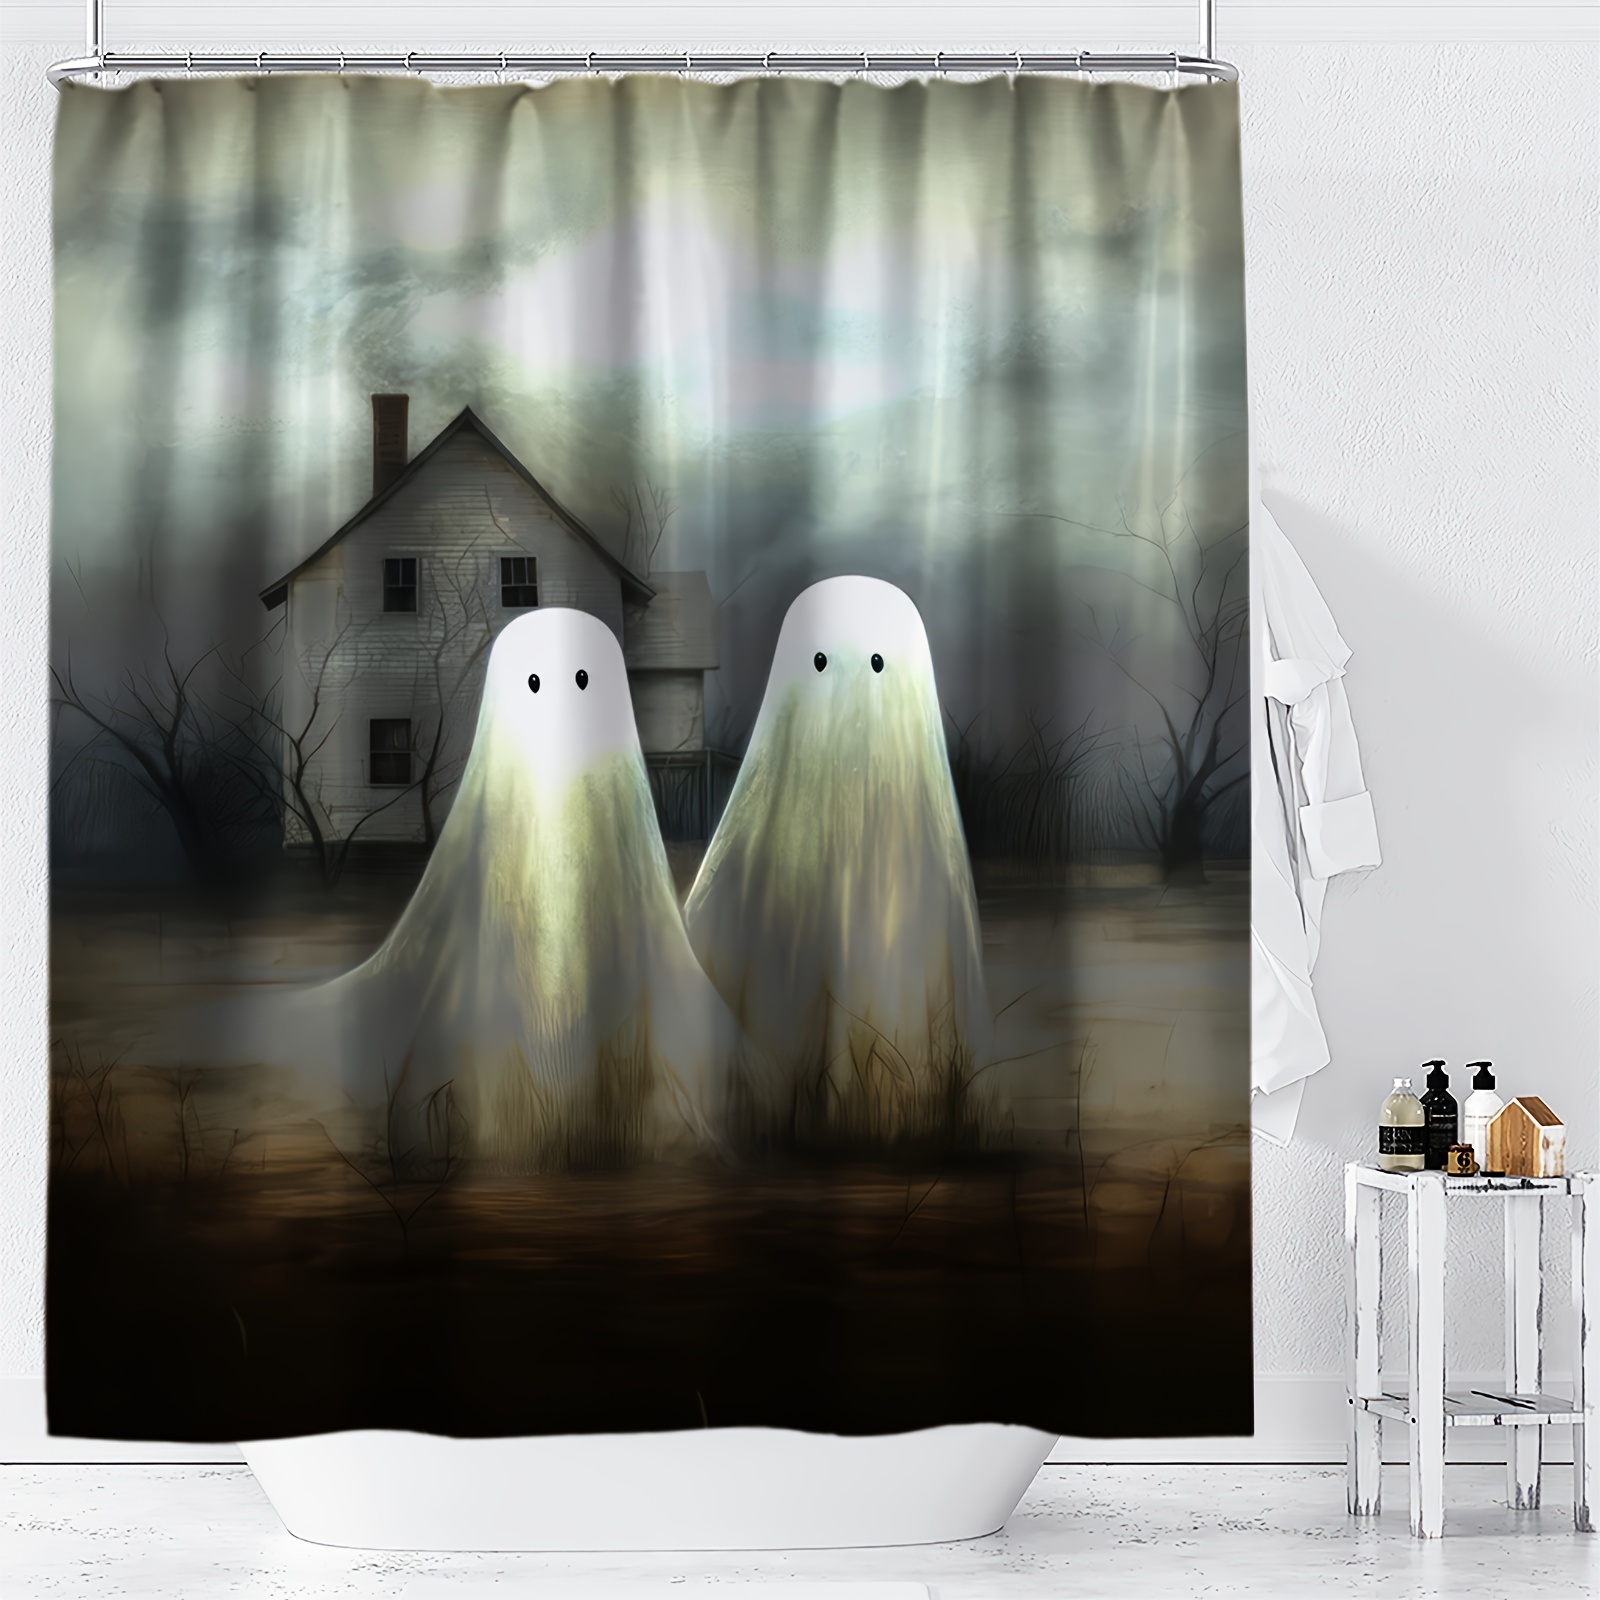 

Ywjhui Halloween Shower Curtain 1pc, Spooky Ghost Mansion Digital Print, Water-resistant Polyester Fabric With Knit Weave, Includes Hooks, Machine Washable, Cartoon Horror Theme Decor For All Seasons